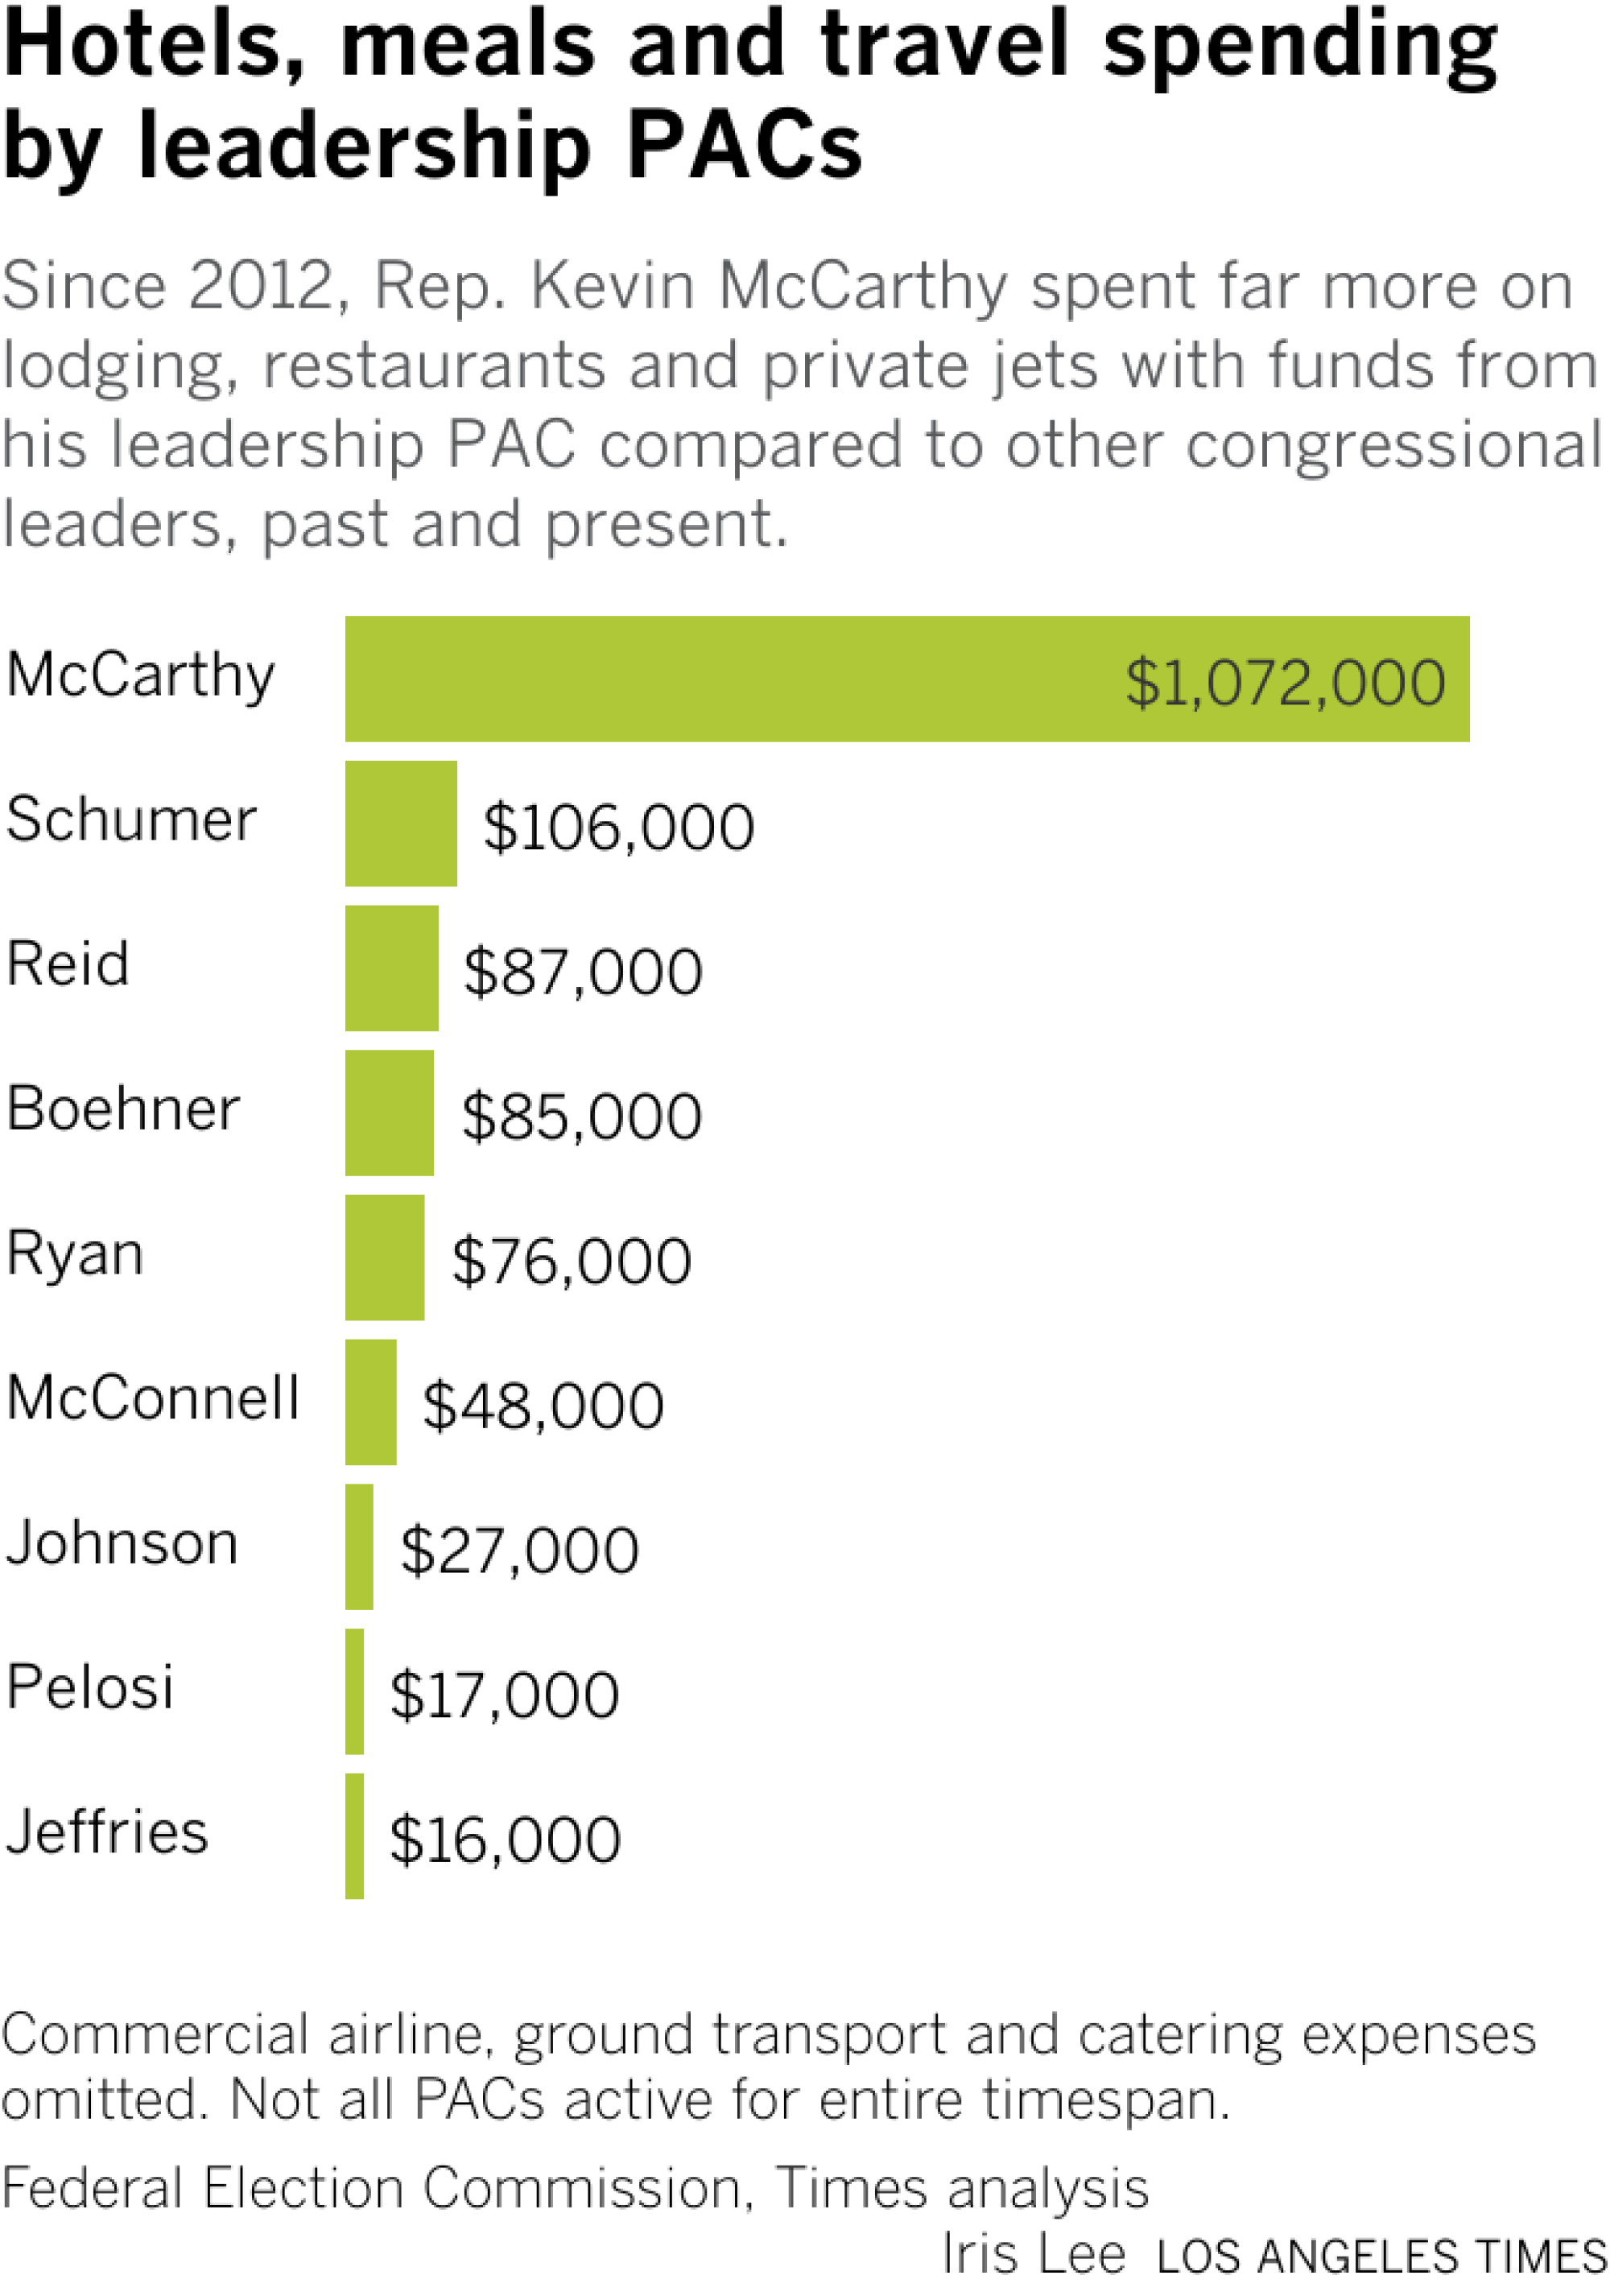 Kevin McCarthy spent over one million in travel, meals and hotels — far more than all other leaders combined.